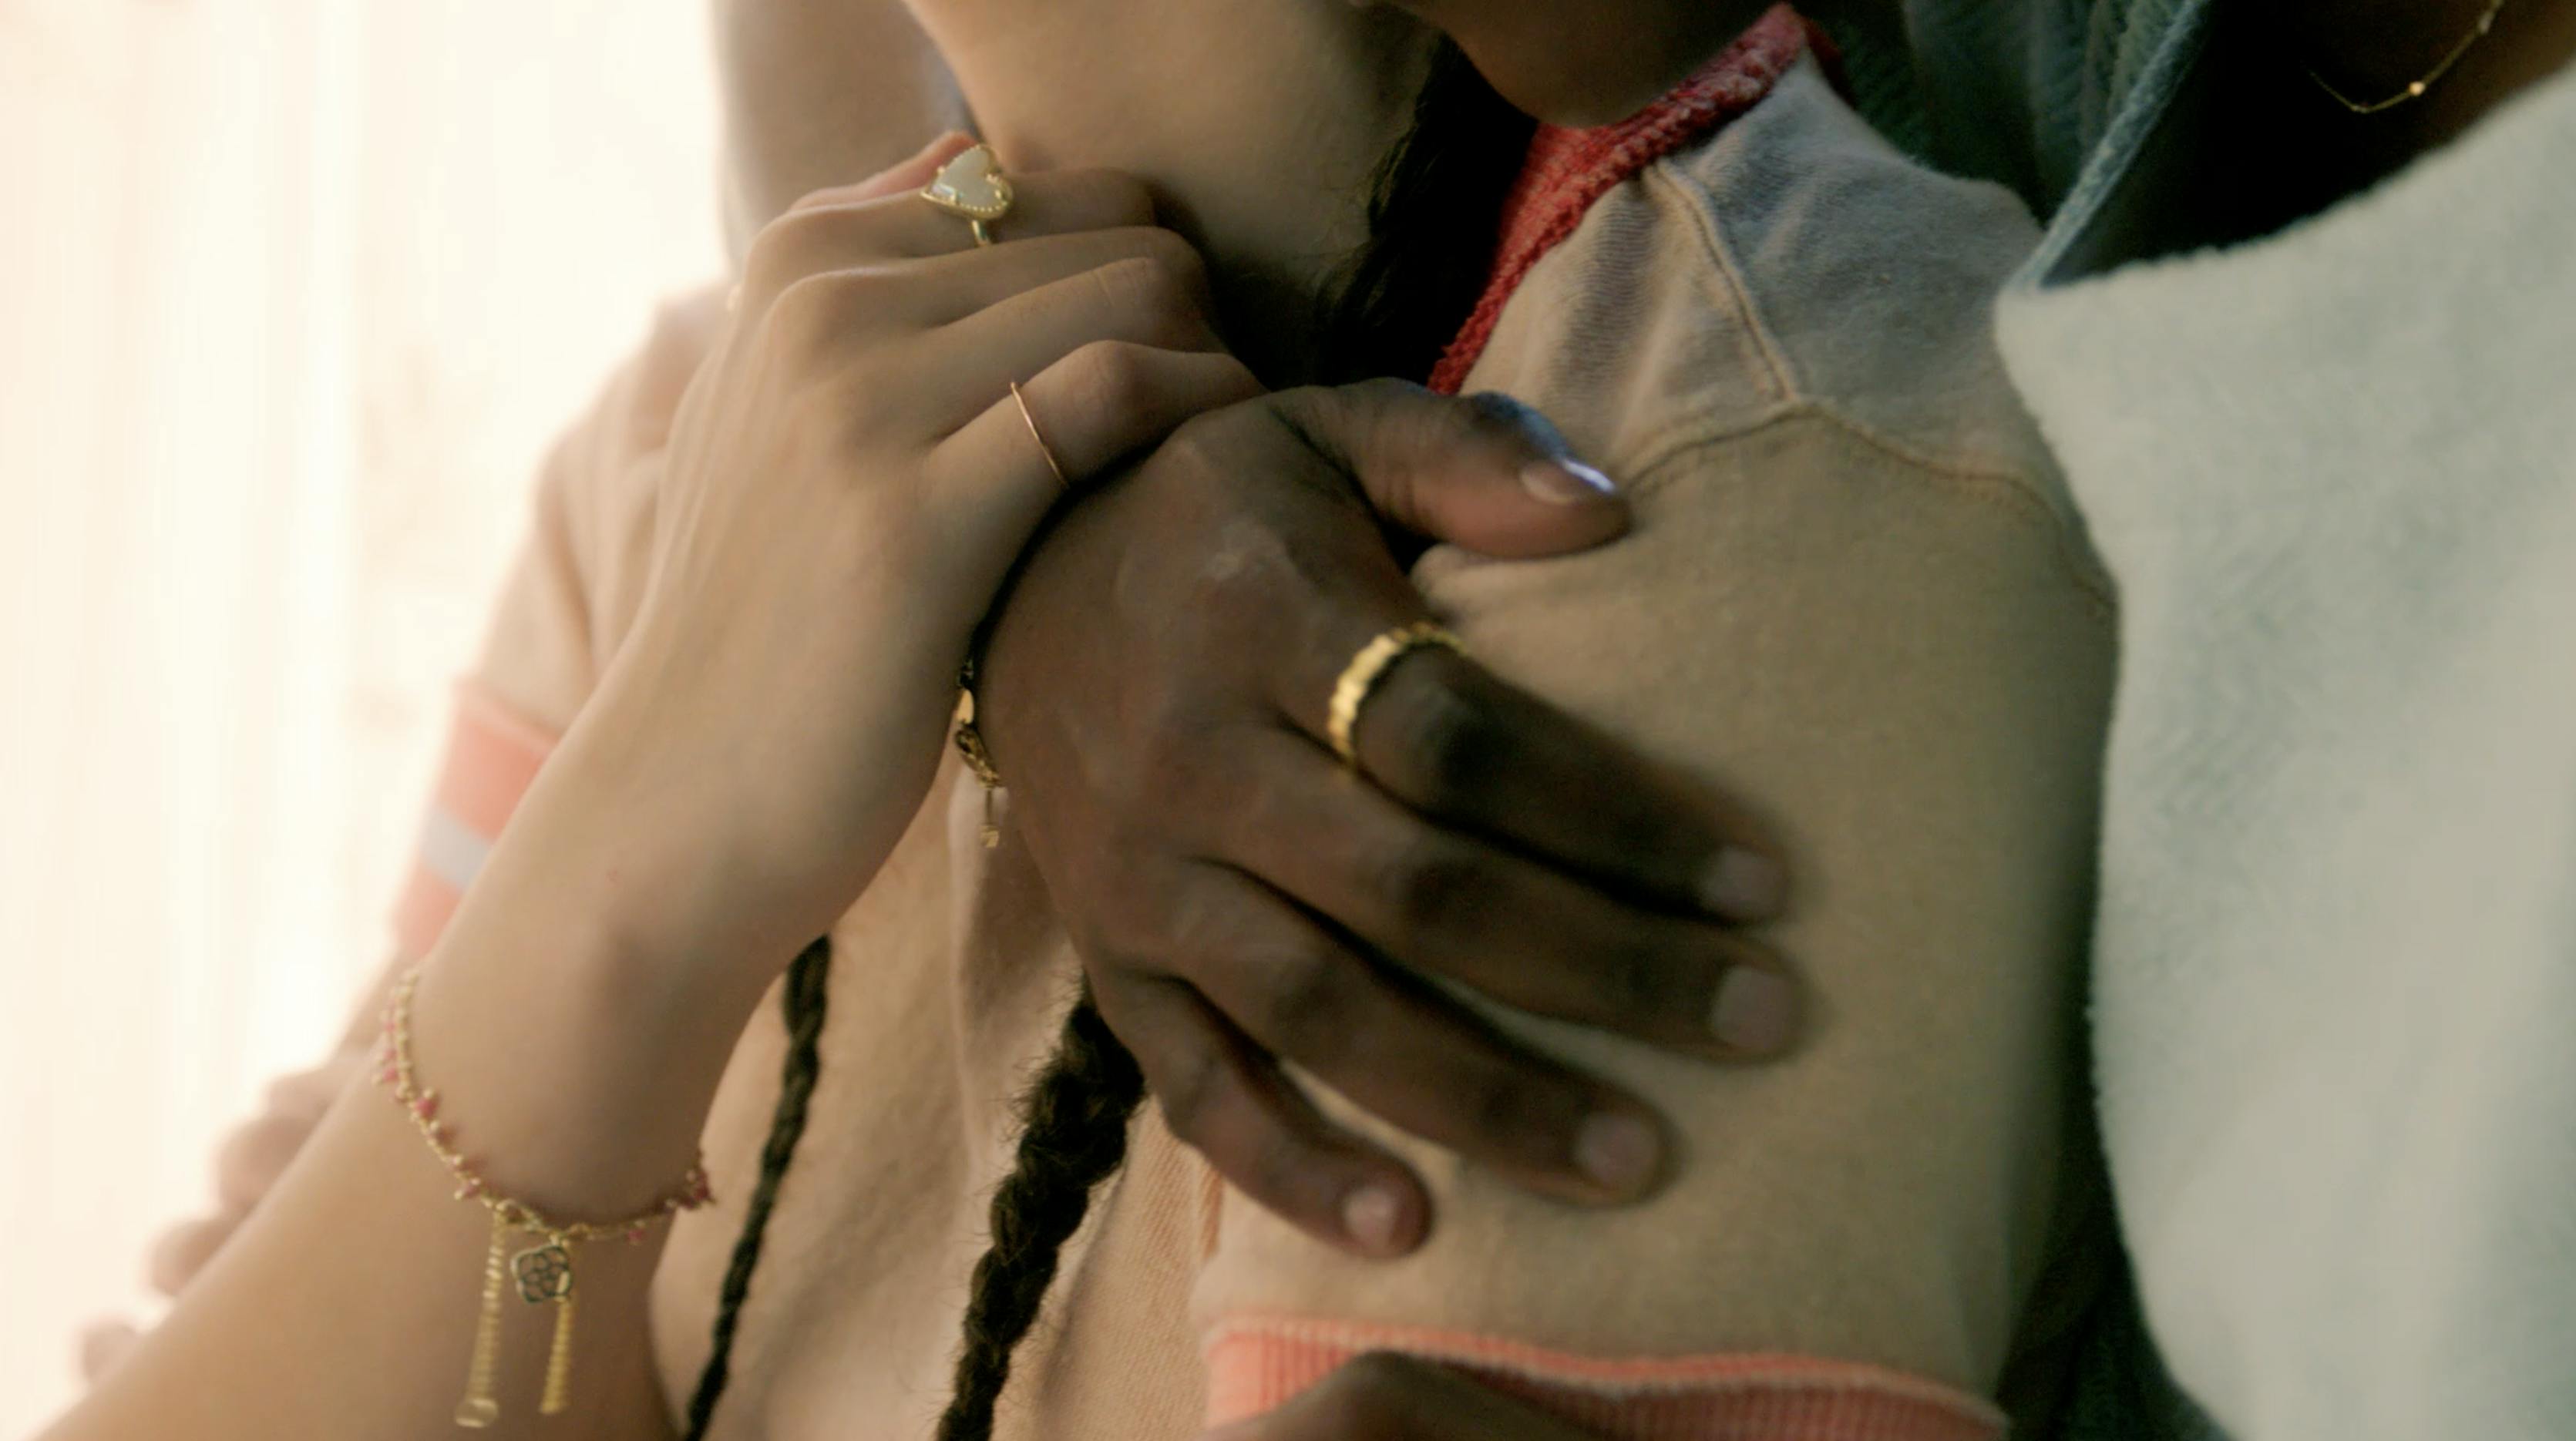 A couple's hands with rings are shown hugging each other